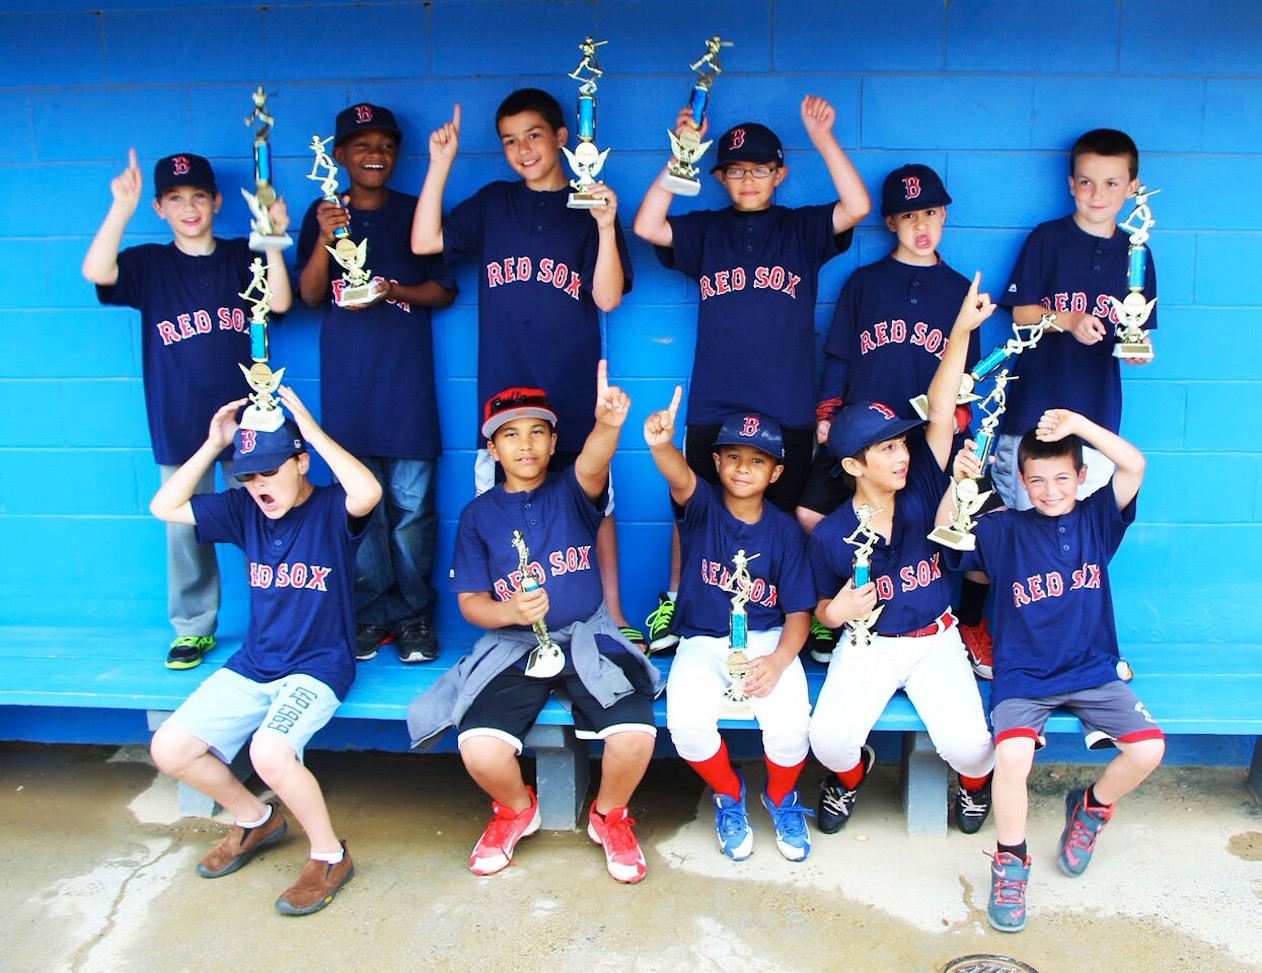 The 9 and 10 year olds on the Red Sox took home their division crown.